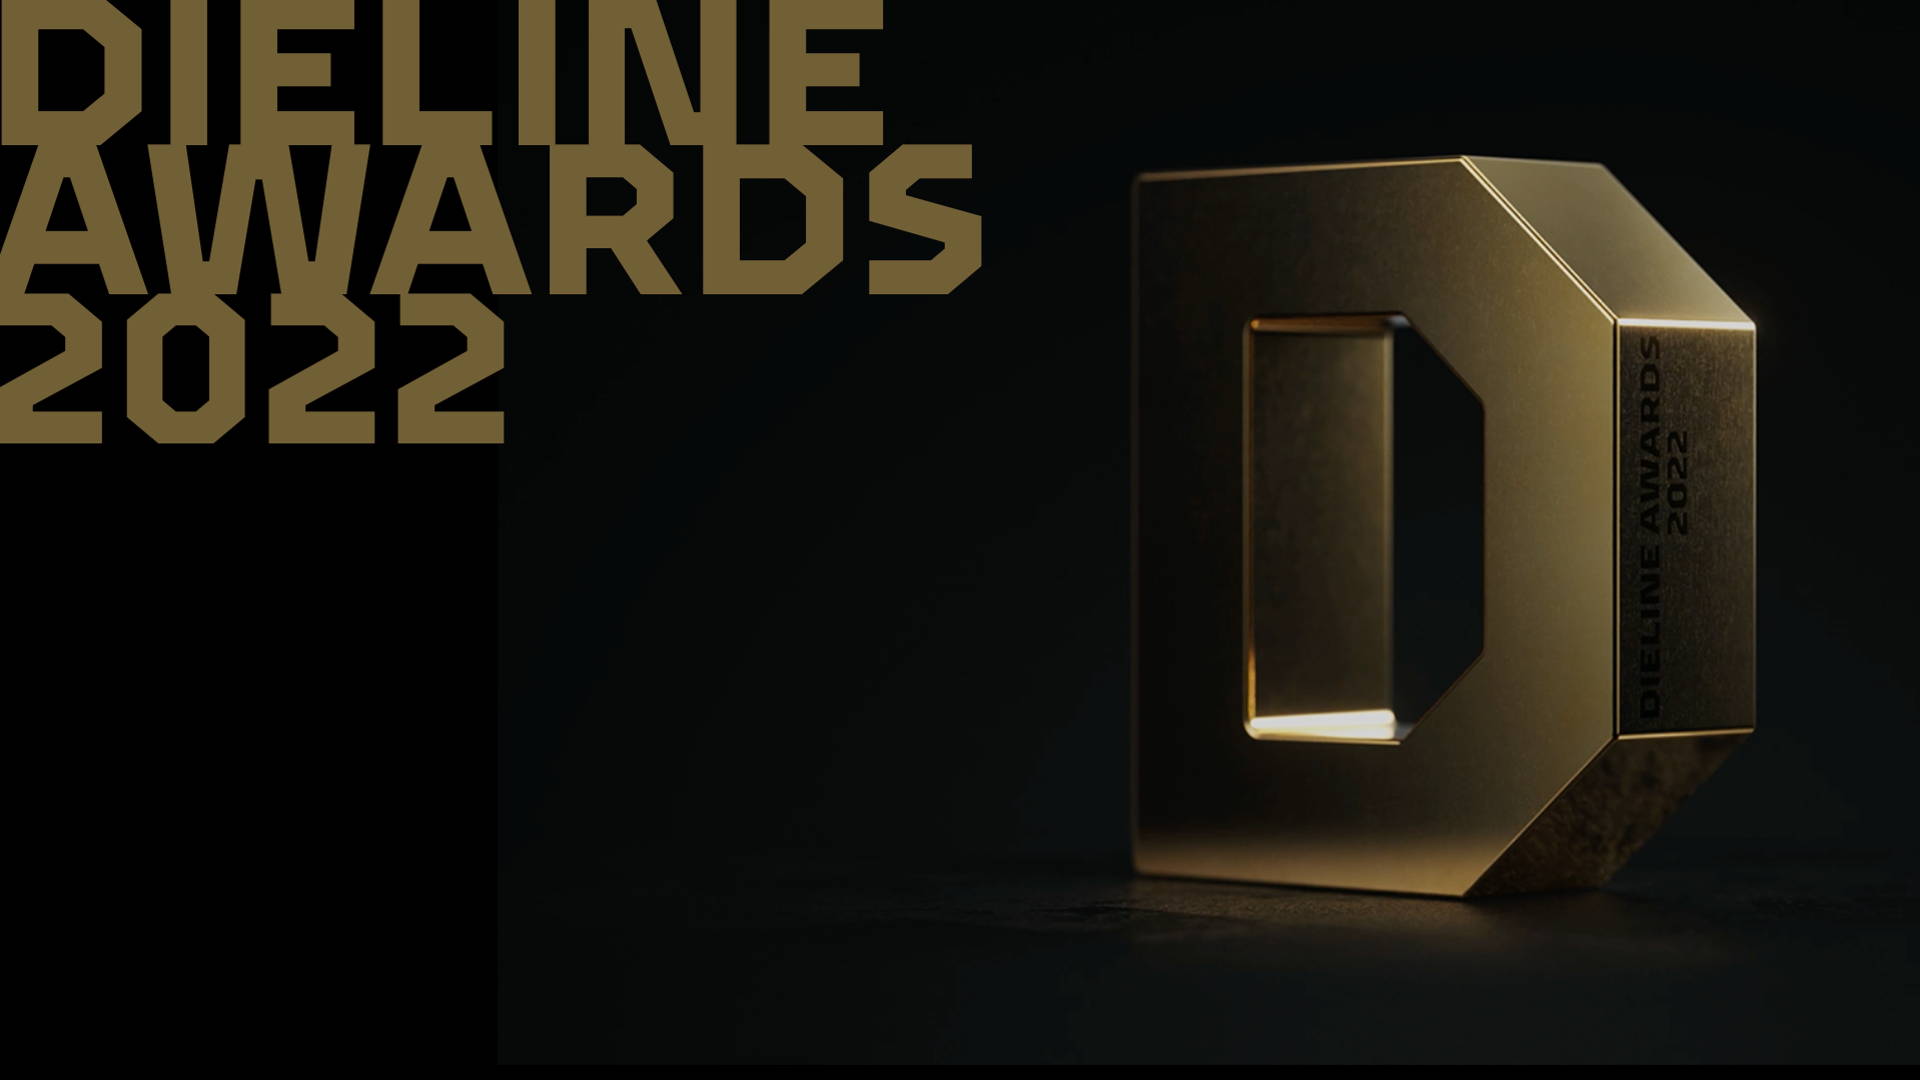 Featured image for Dieline Awards 2022: Leave Your Mark in 2022